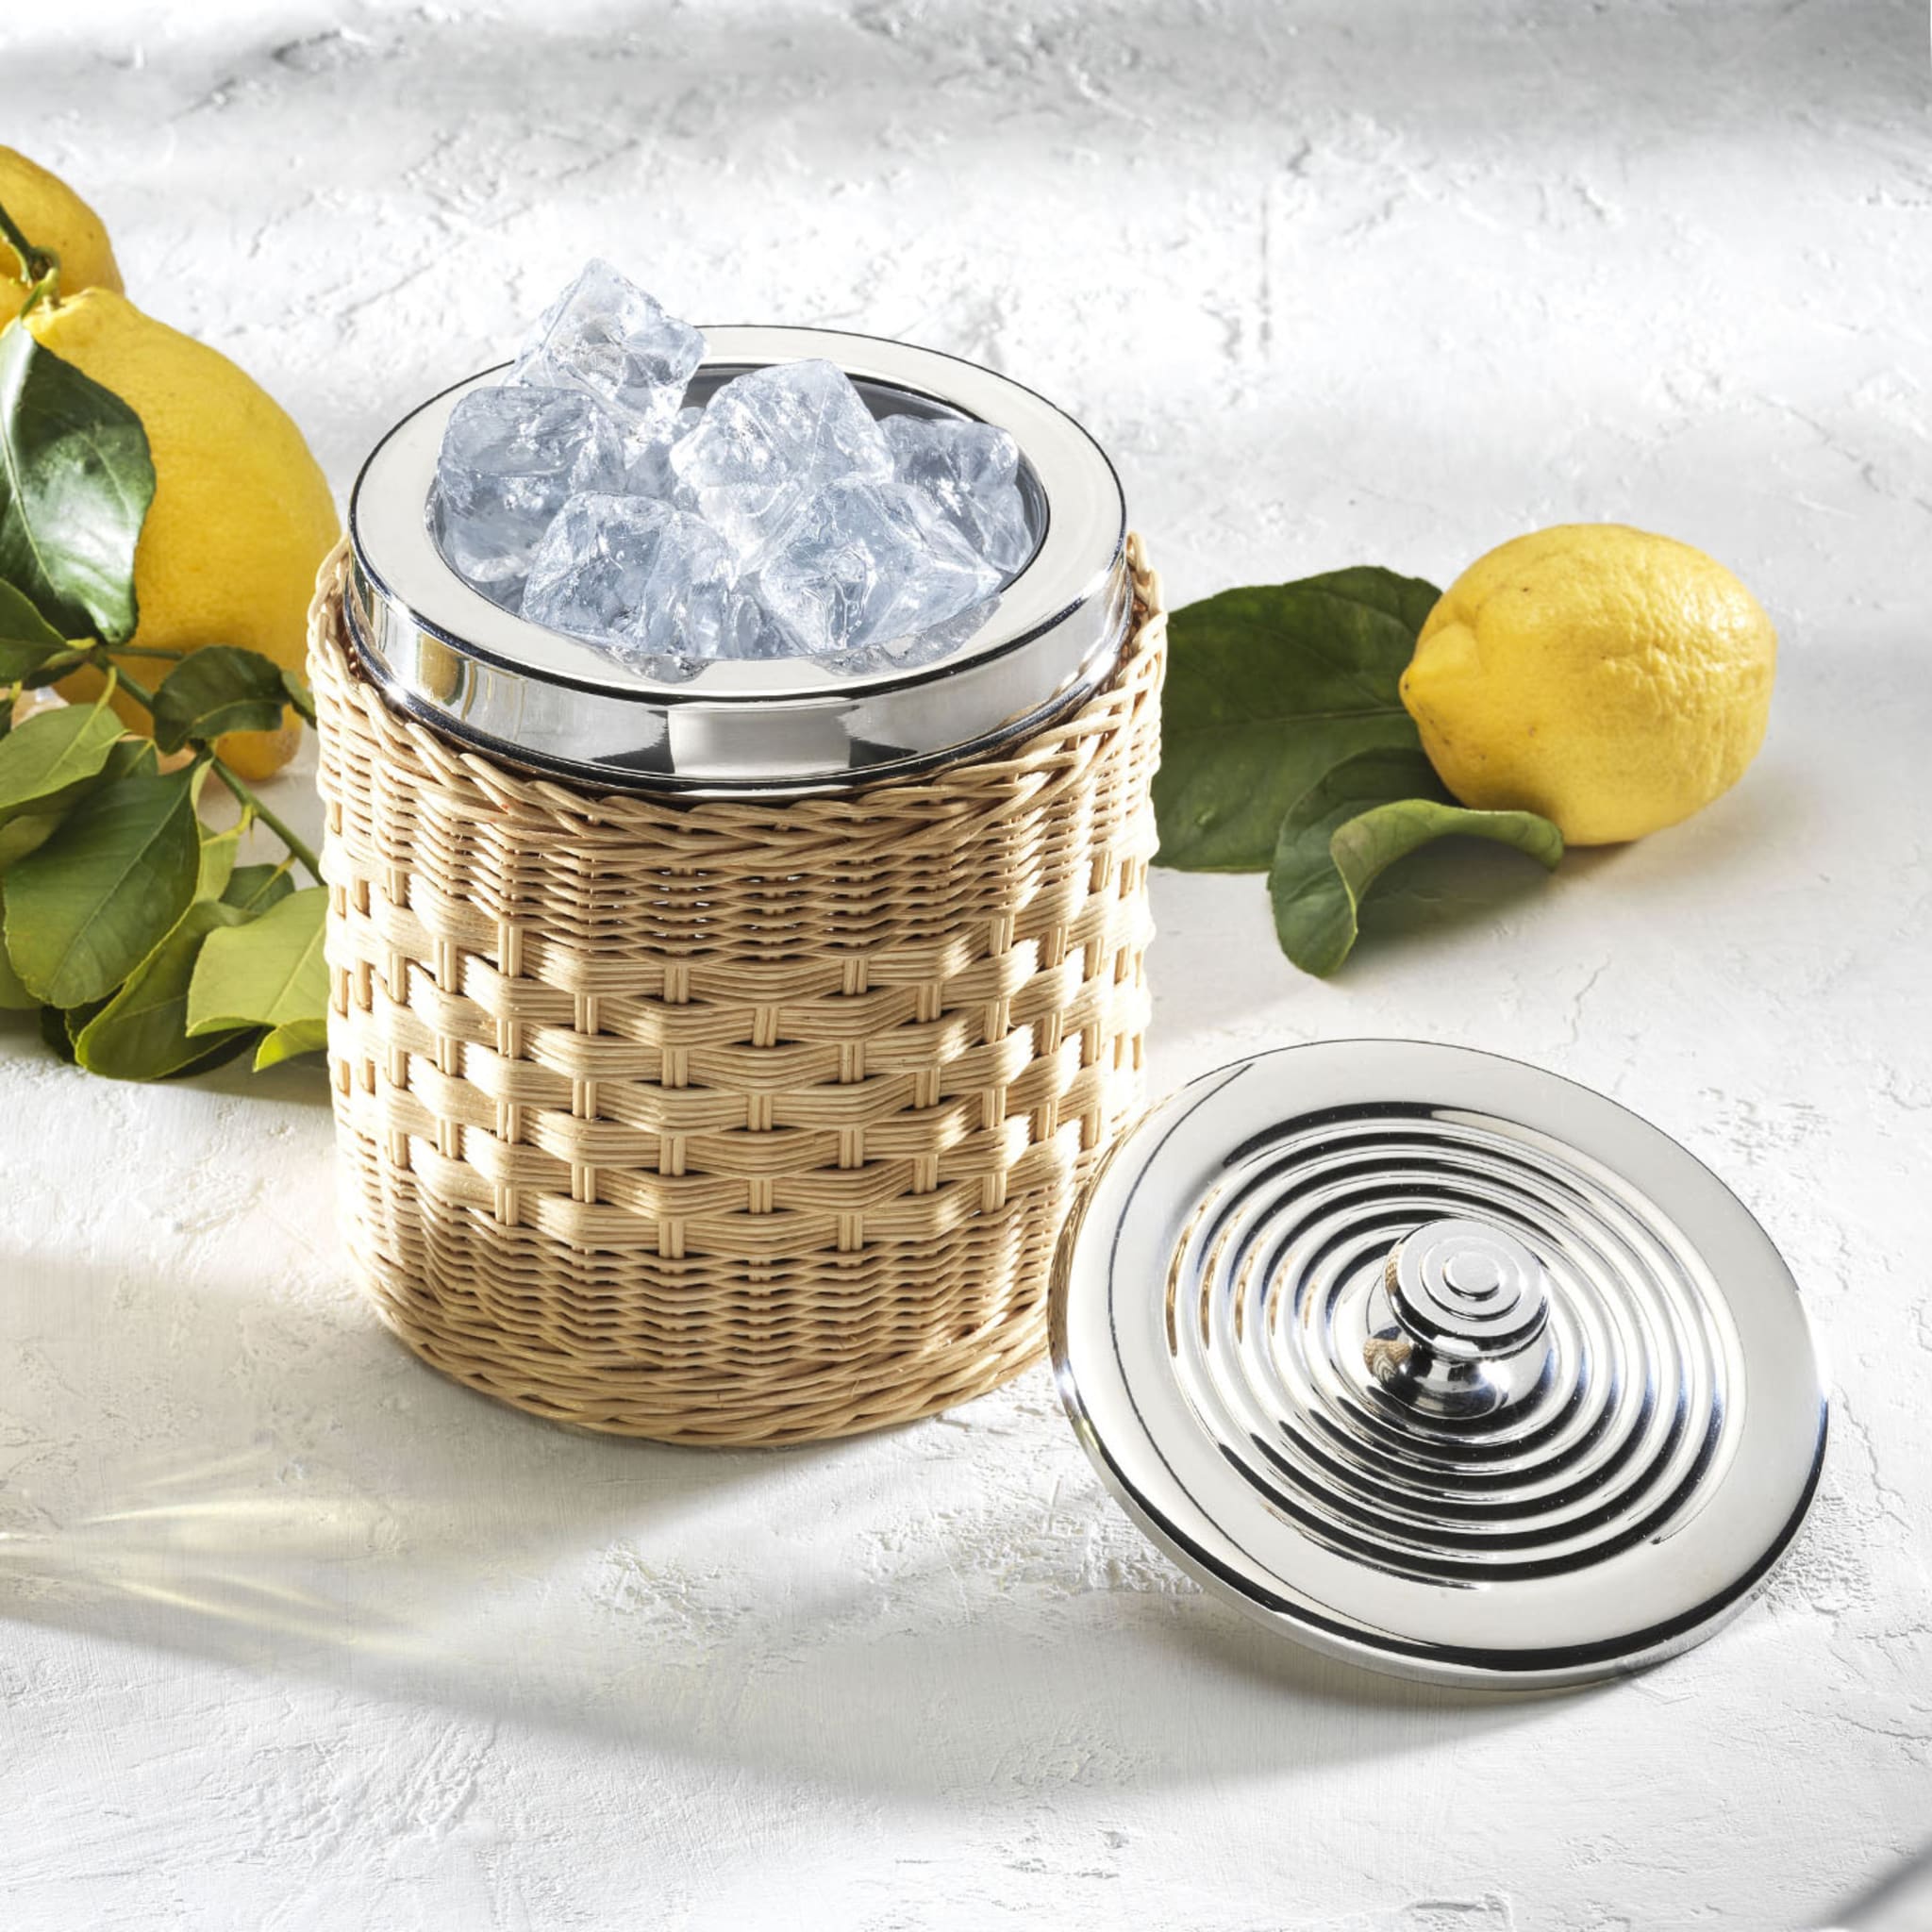 Iris Wicker Basket with Stainless Steel Ice Container - Alternative view 1